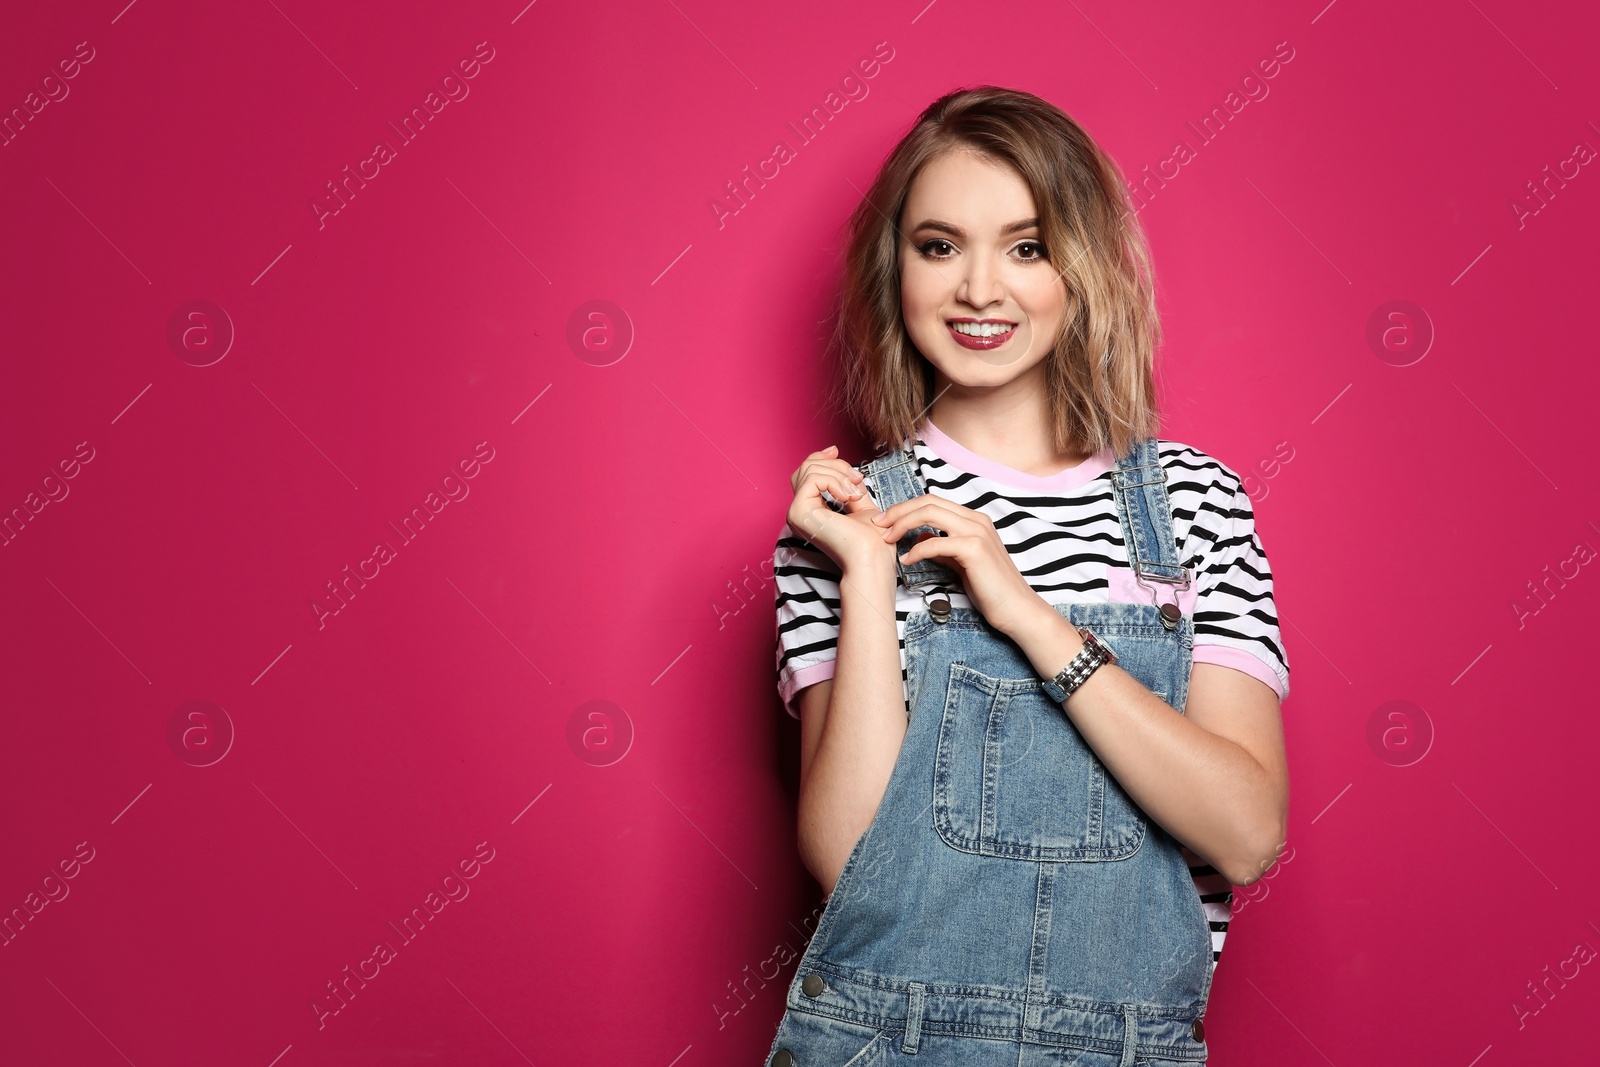 Photo of Beautiful young woman posing on color background